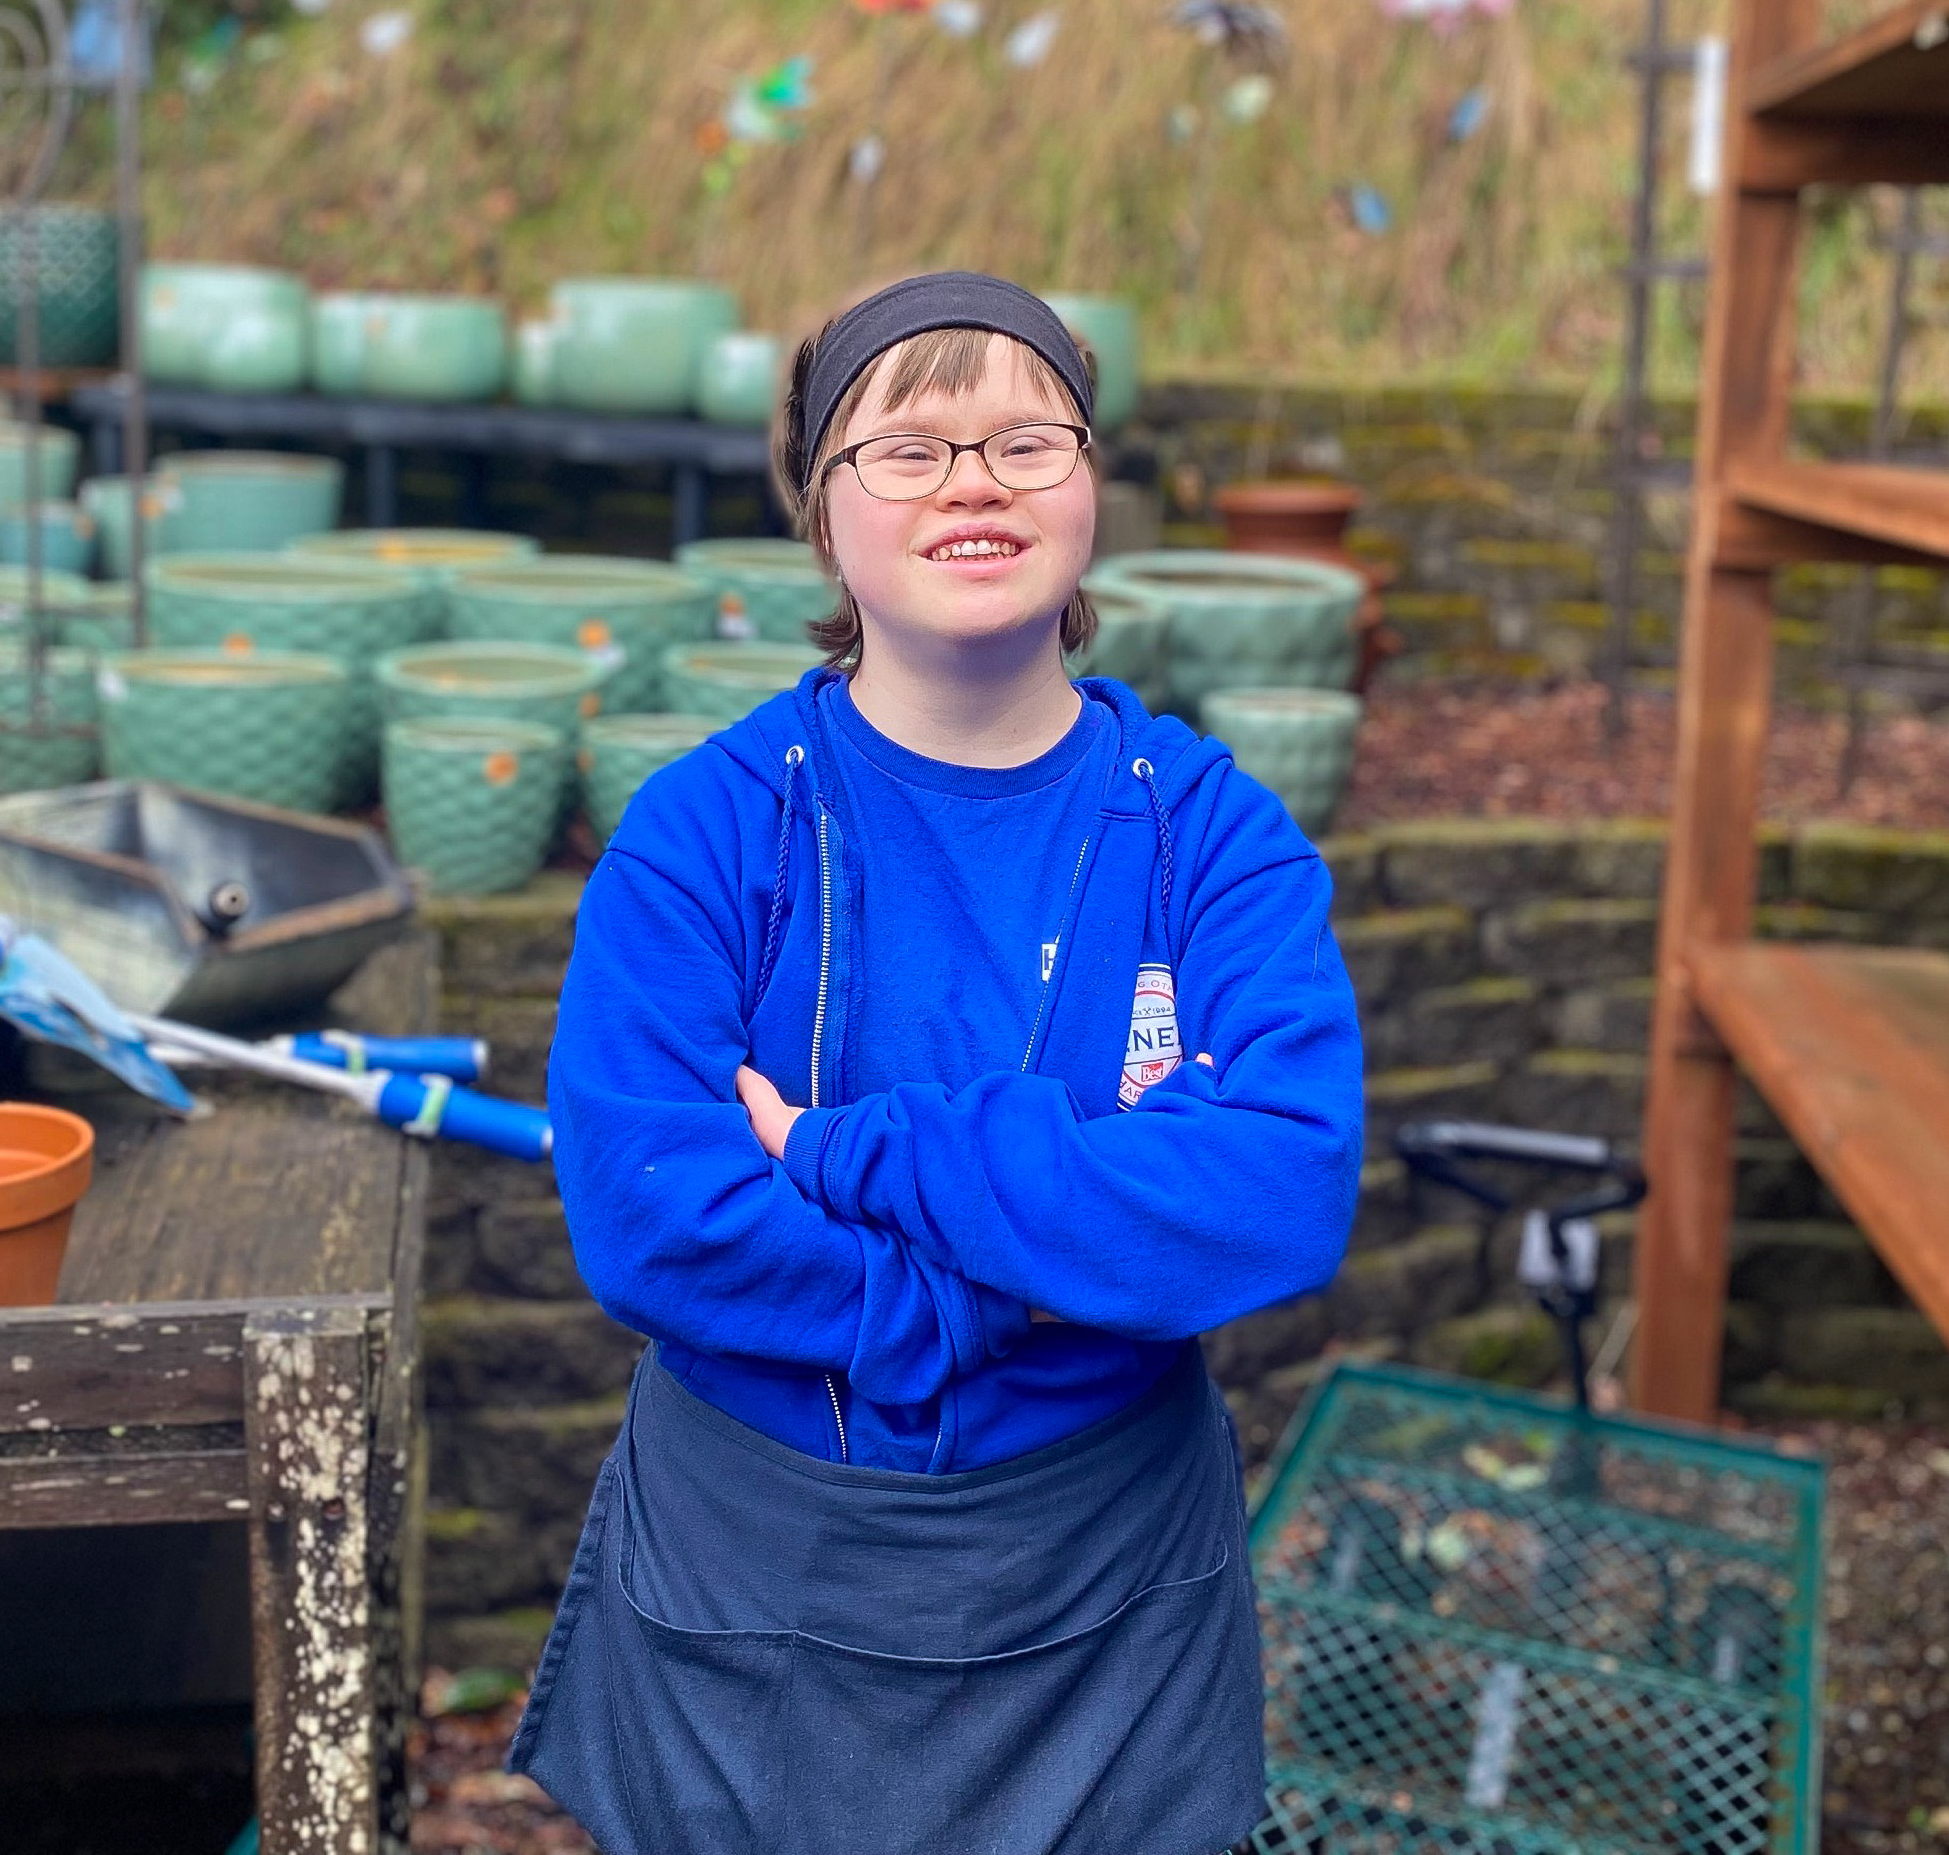 Image: Naomi stands outside in front of a table of empty blue ceramic flower pots with her arms crossed and smiling, wearing a royal blue hoodie & t-shirt, black-rimmed glasses, and shop apron.